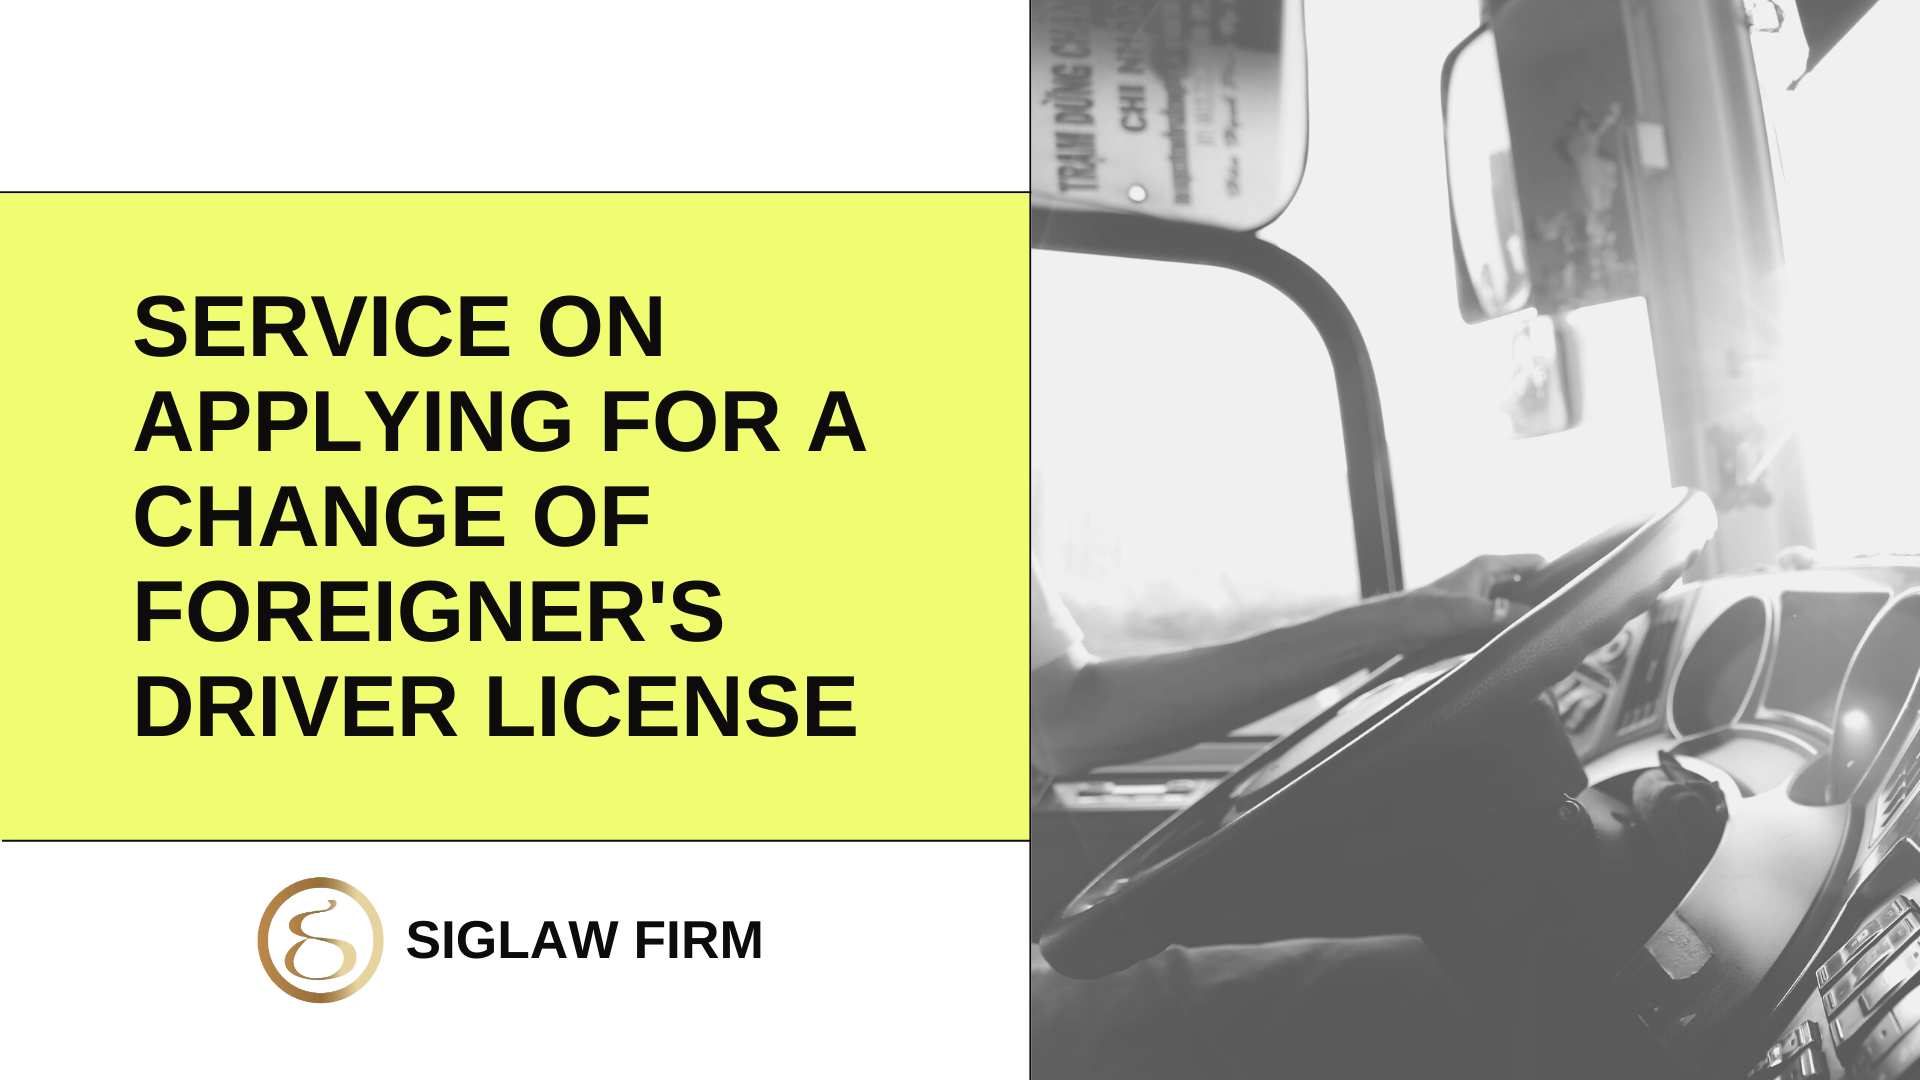 Provide consultation on applying for a change of drivers license for foreigners